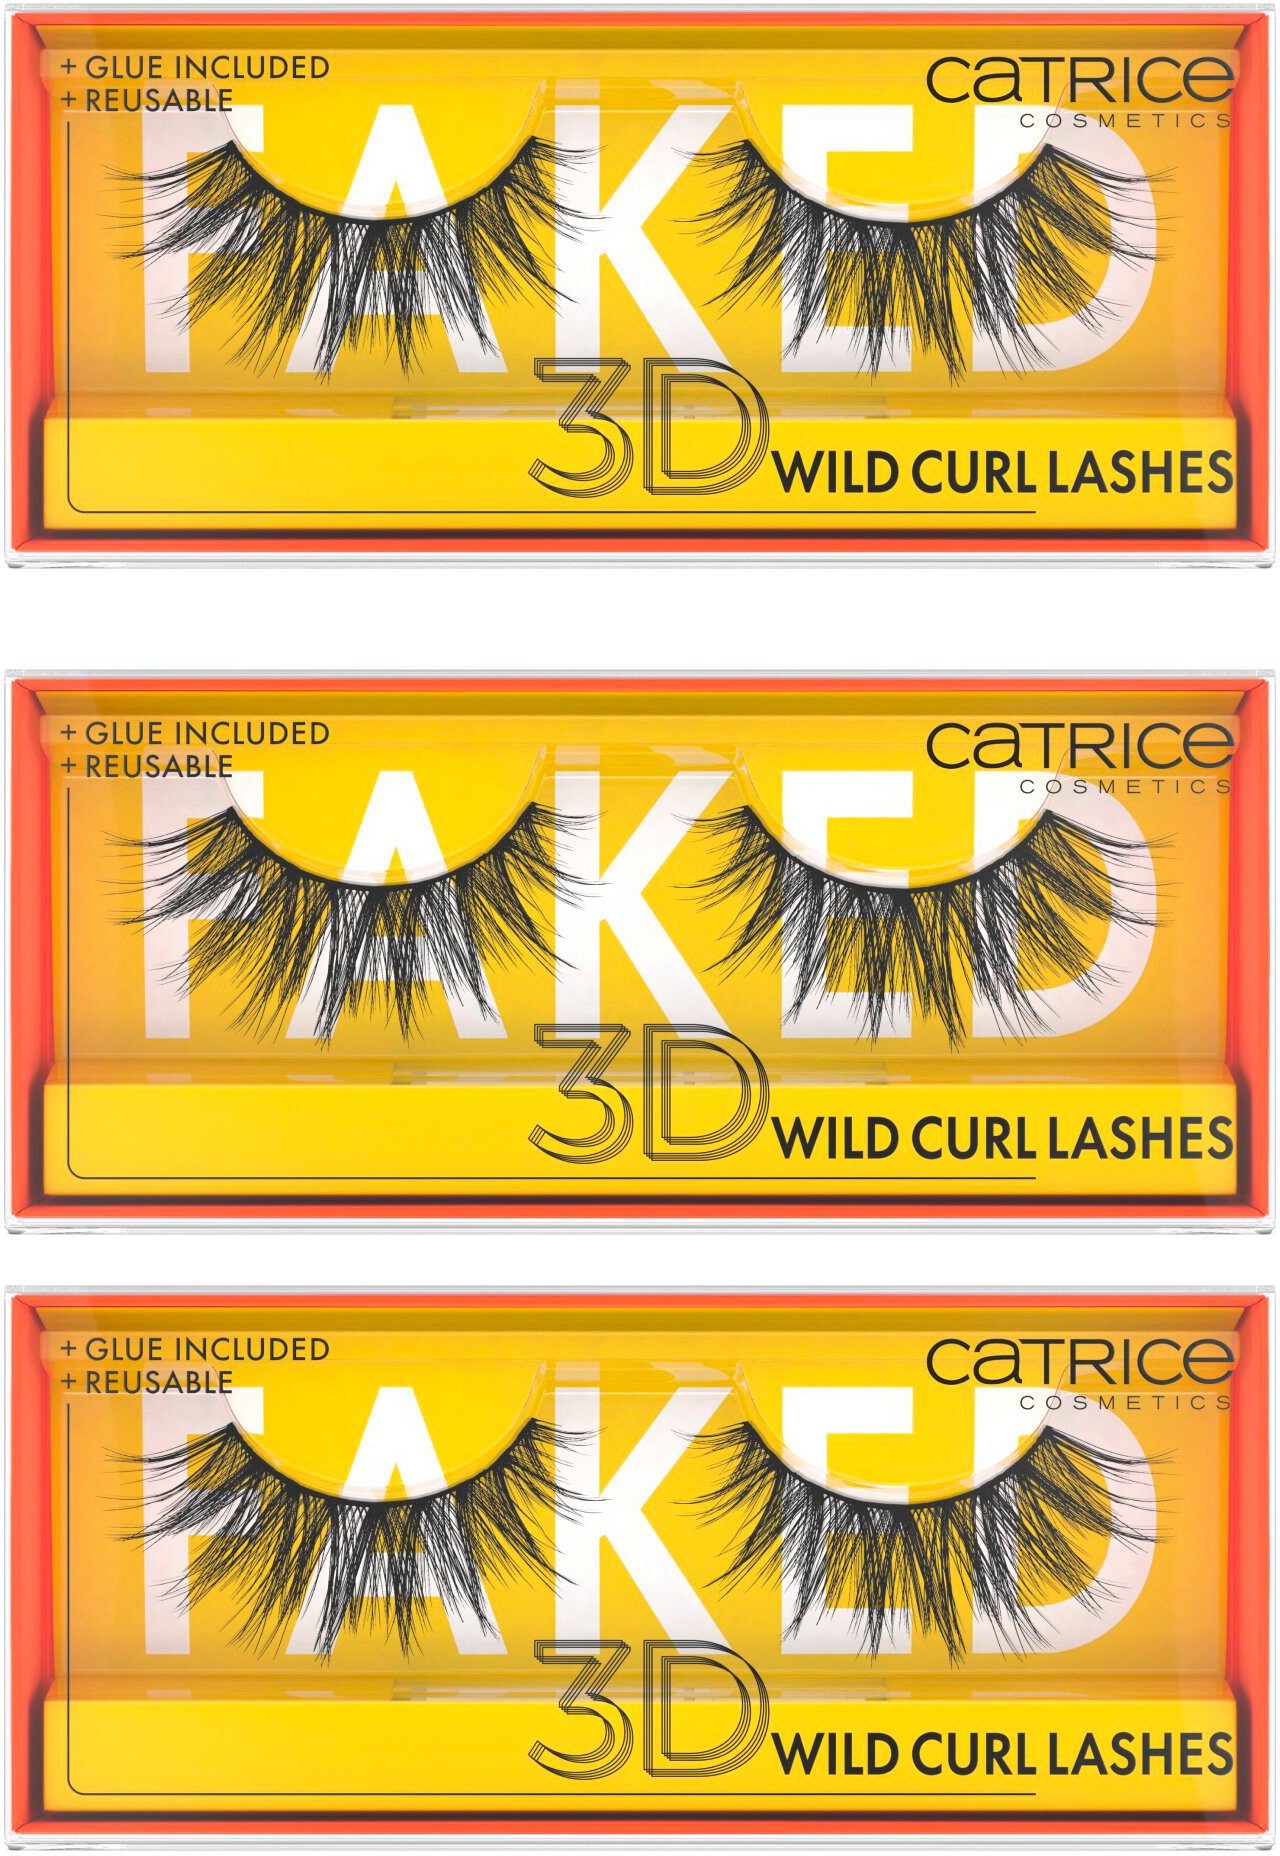 Catrice Bandwimpern Lashes, 3D Faked 3 Curl Wild Set, tlg